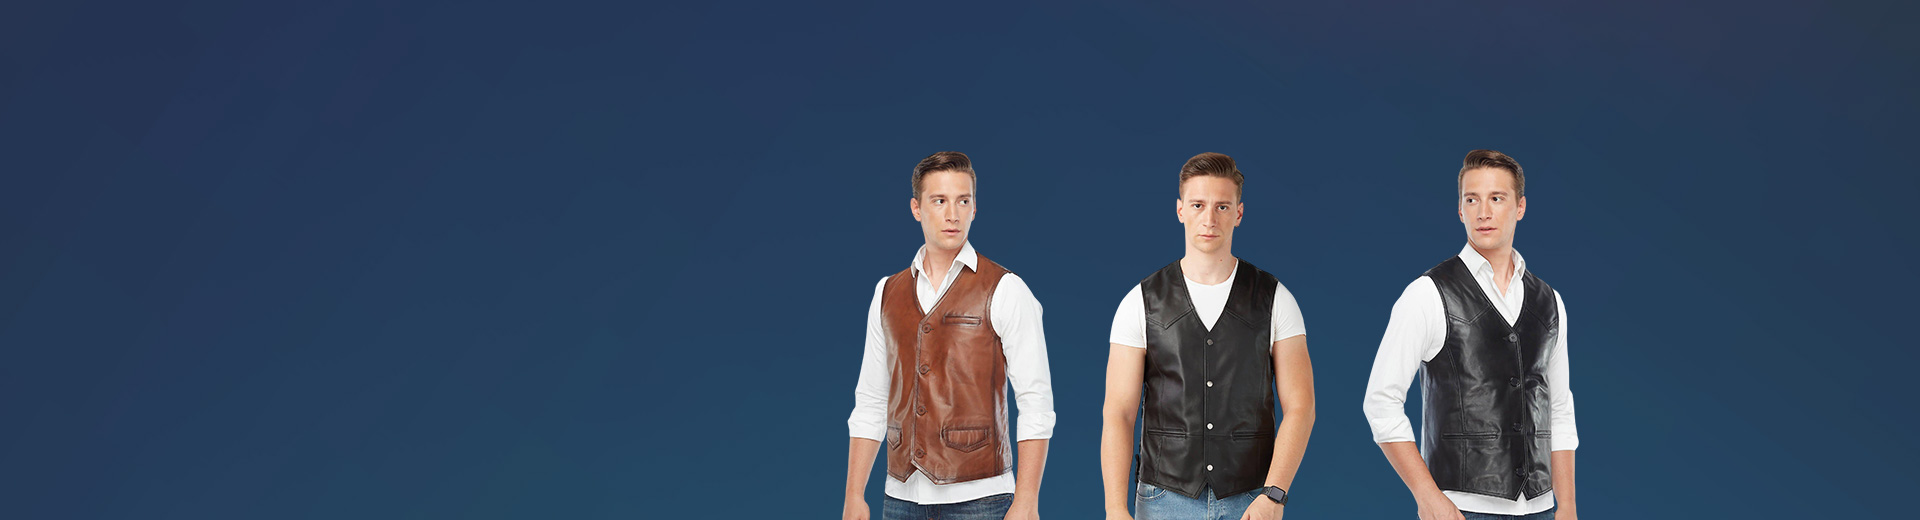 Leather Vest Manufacturers in Ivanovo